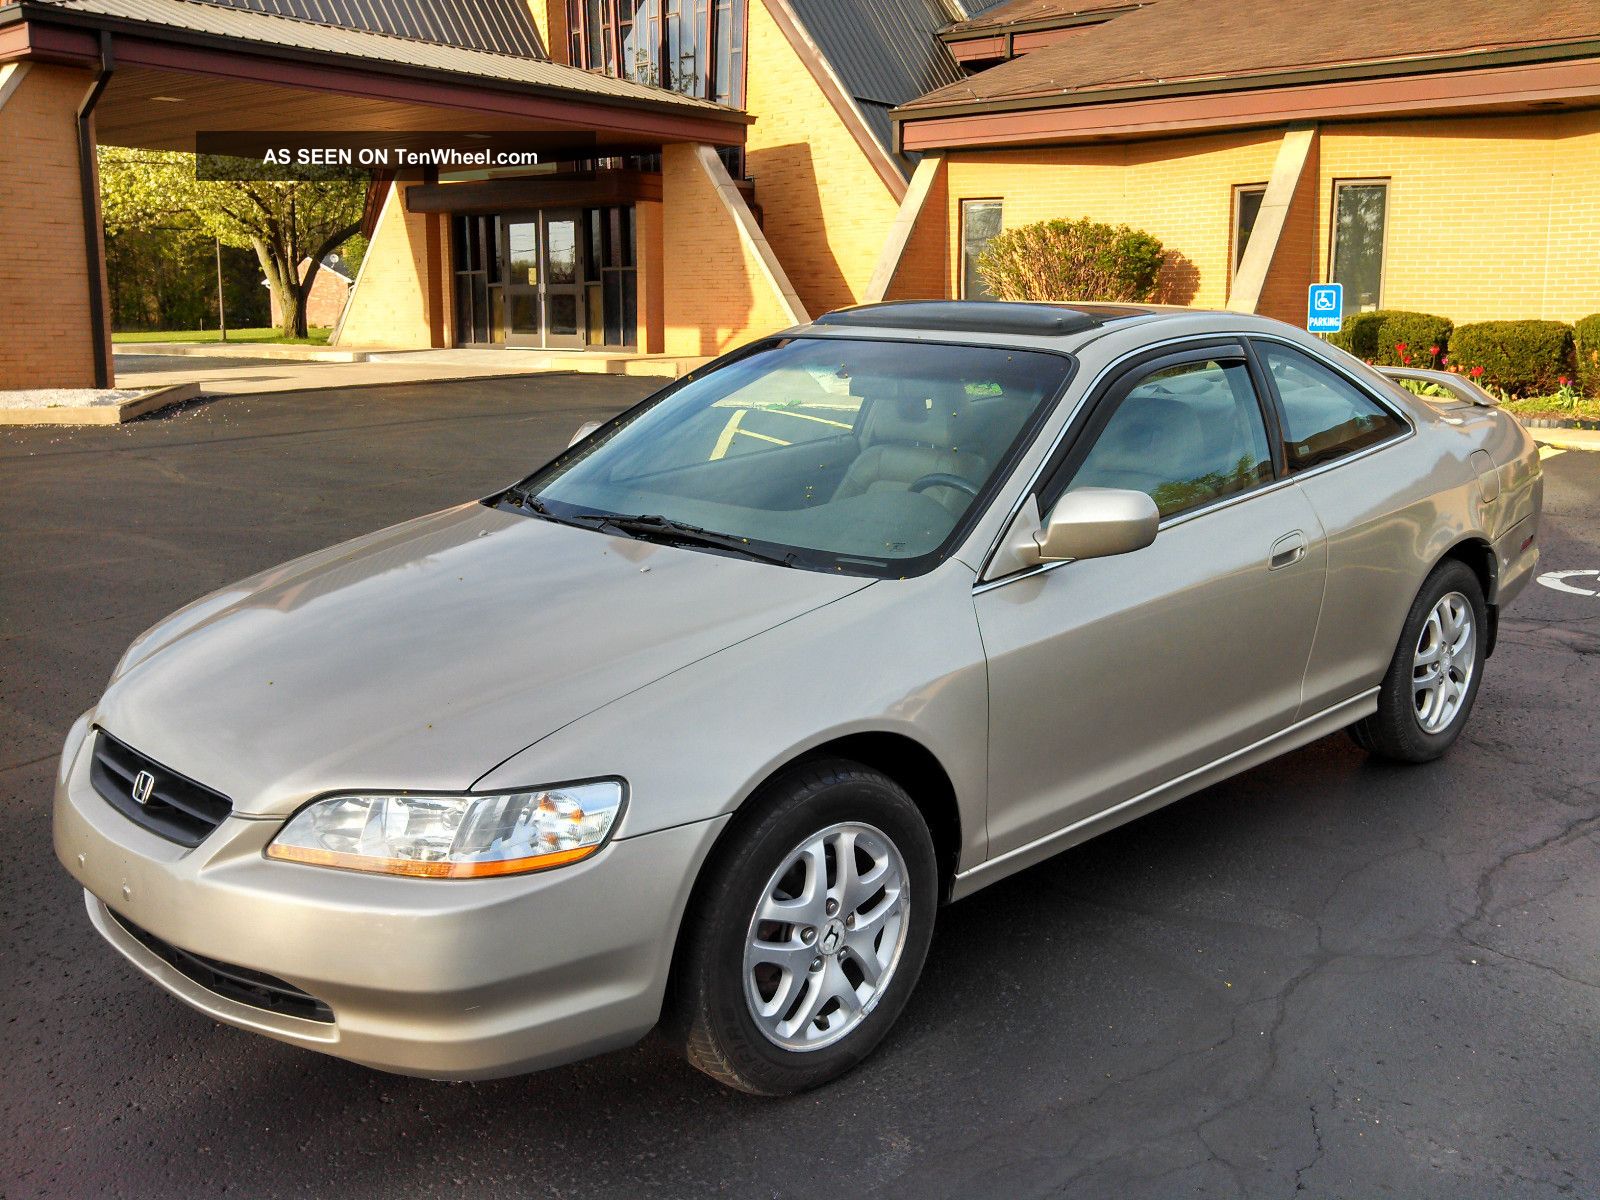 2001 Honda Accord 2dr Coupe ( (3. 0 Liter 6 Cylinder, Automatic)) Nr